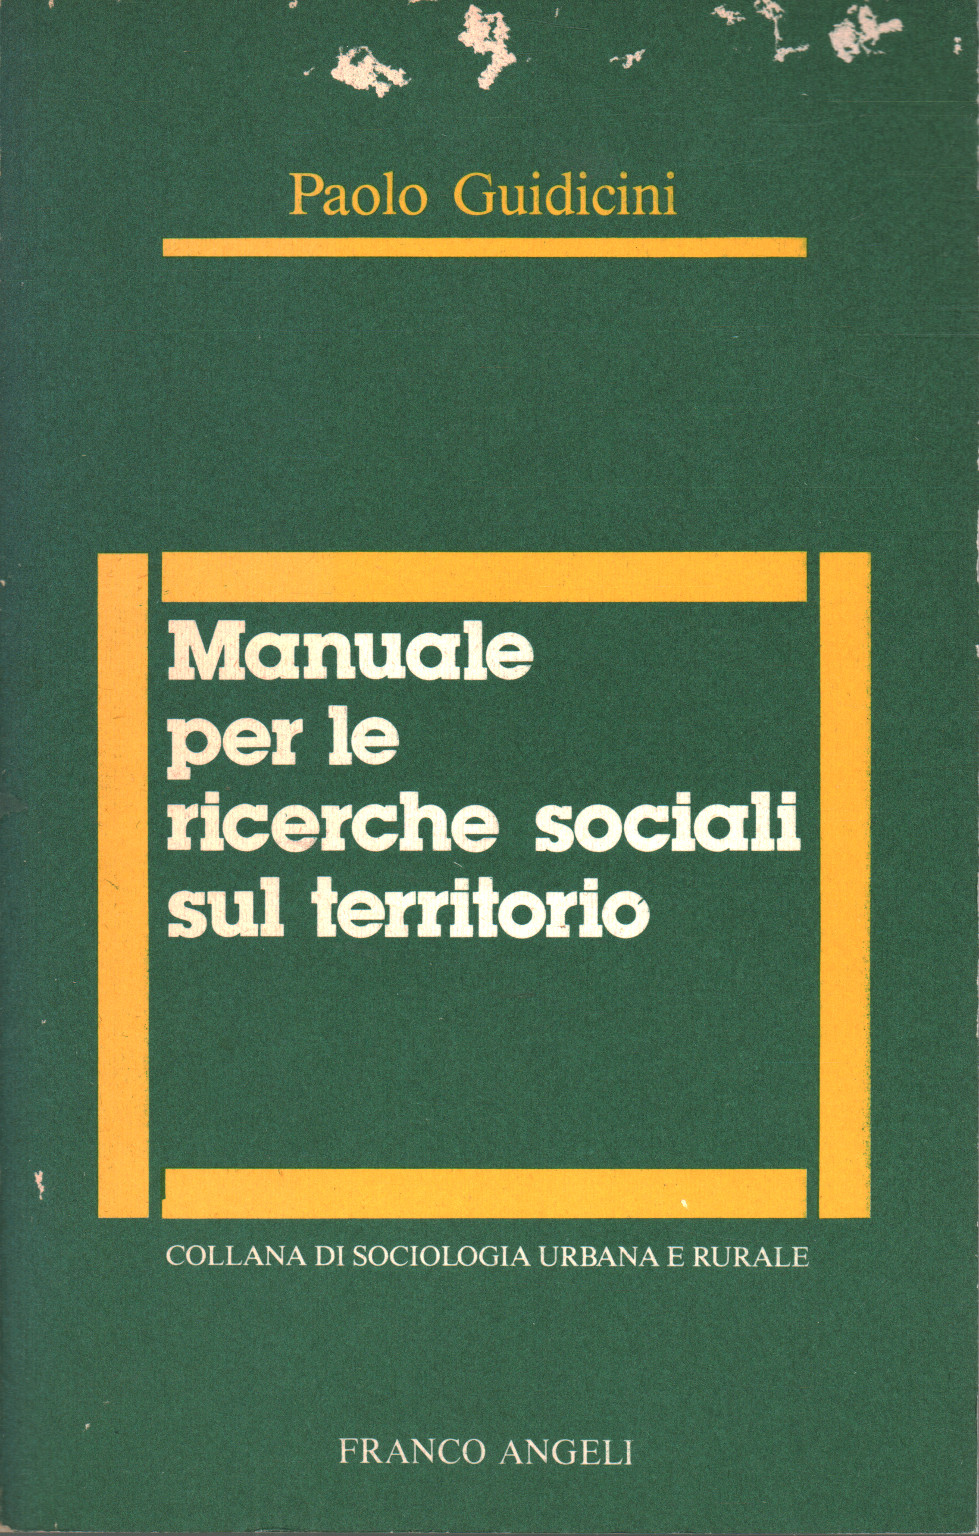 Handbook for social research on the territory, Paolo Guidicini